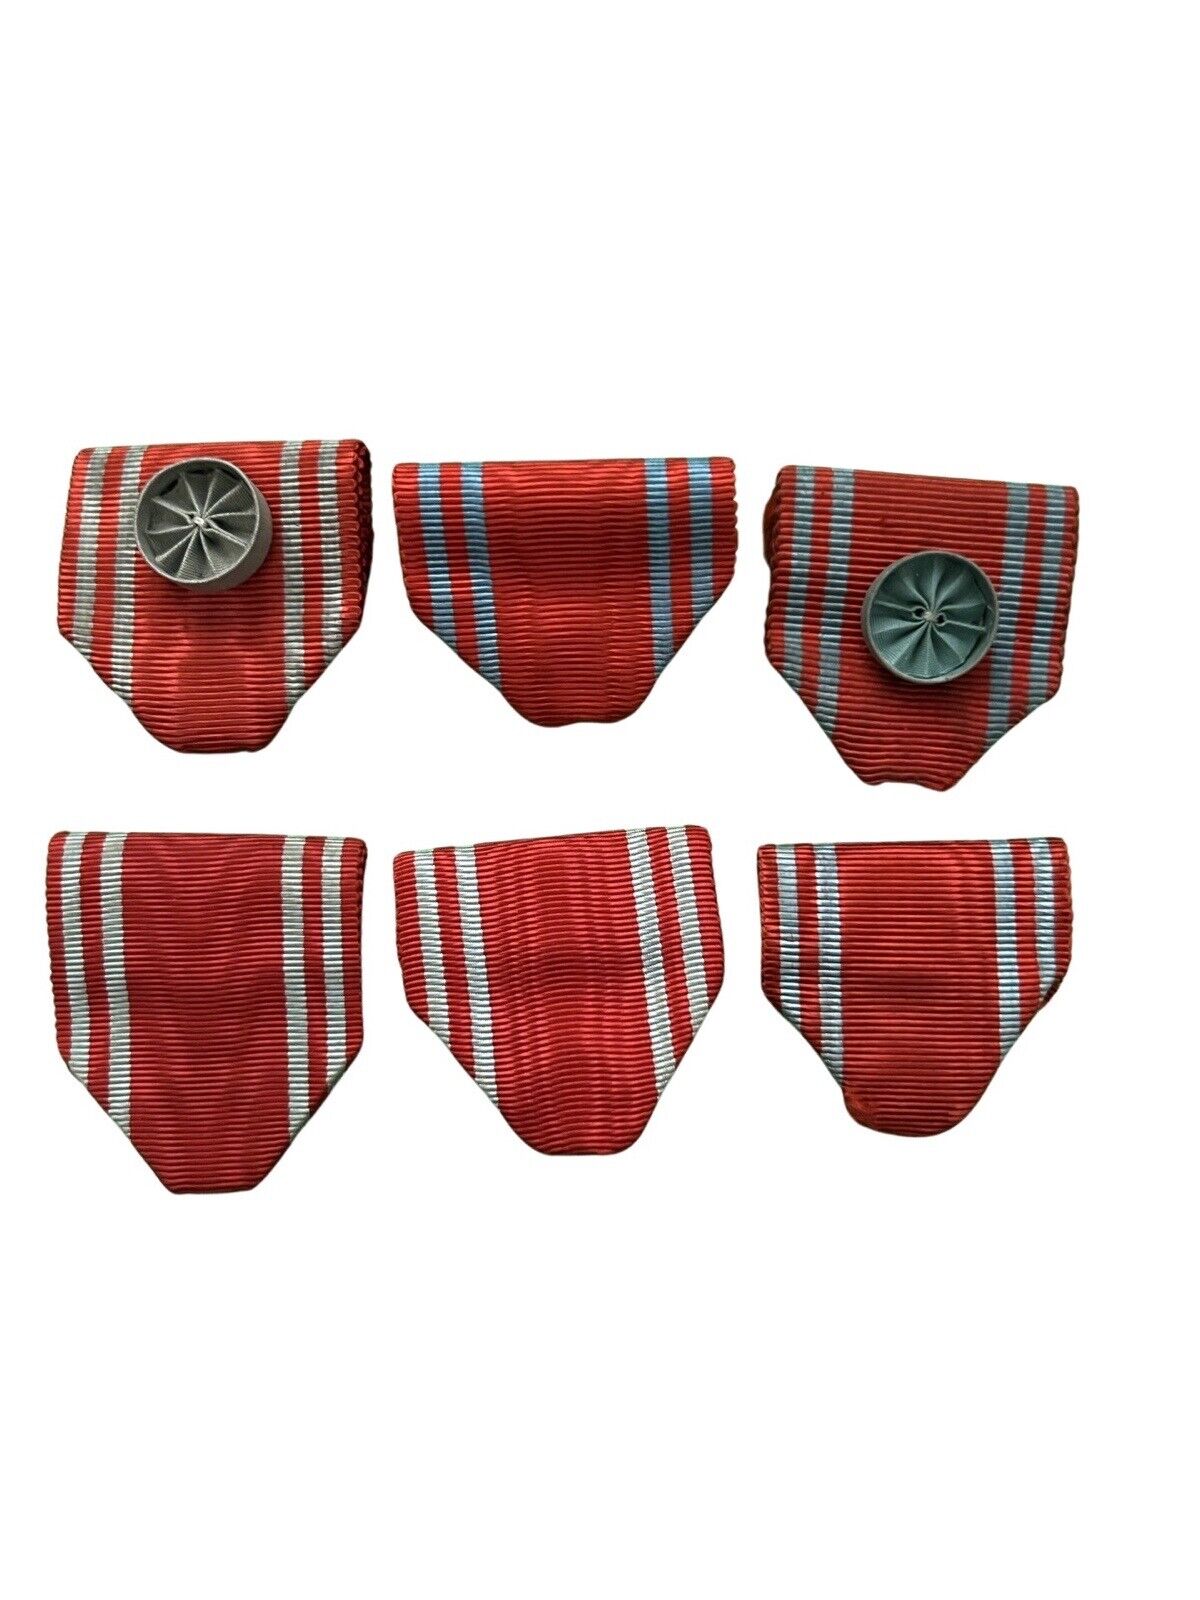 WW2 WWII Red Cross Medal Ribbon Lot Set Japan Military Group Of 5